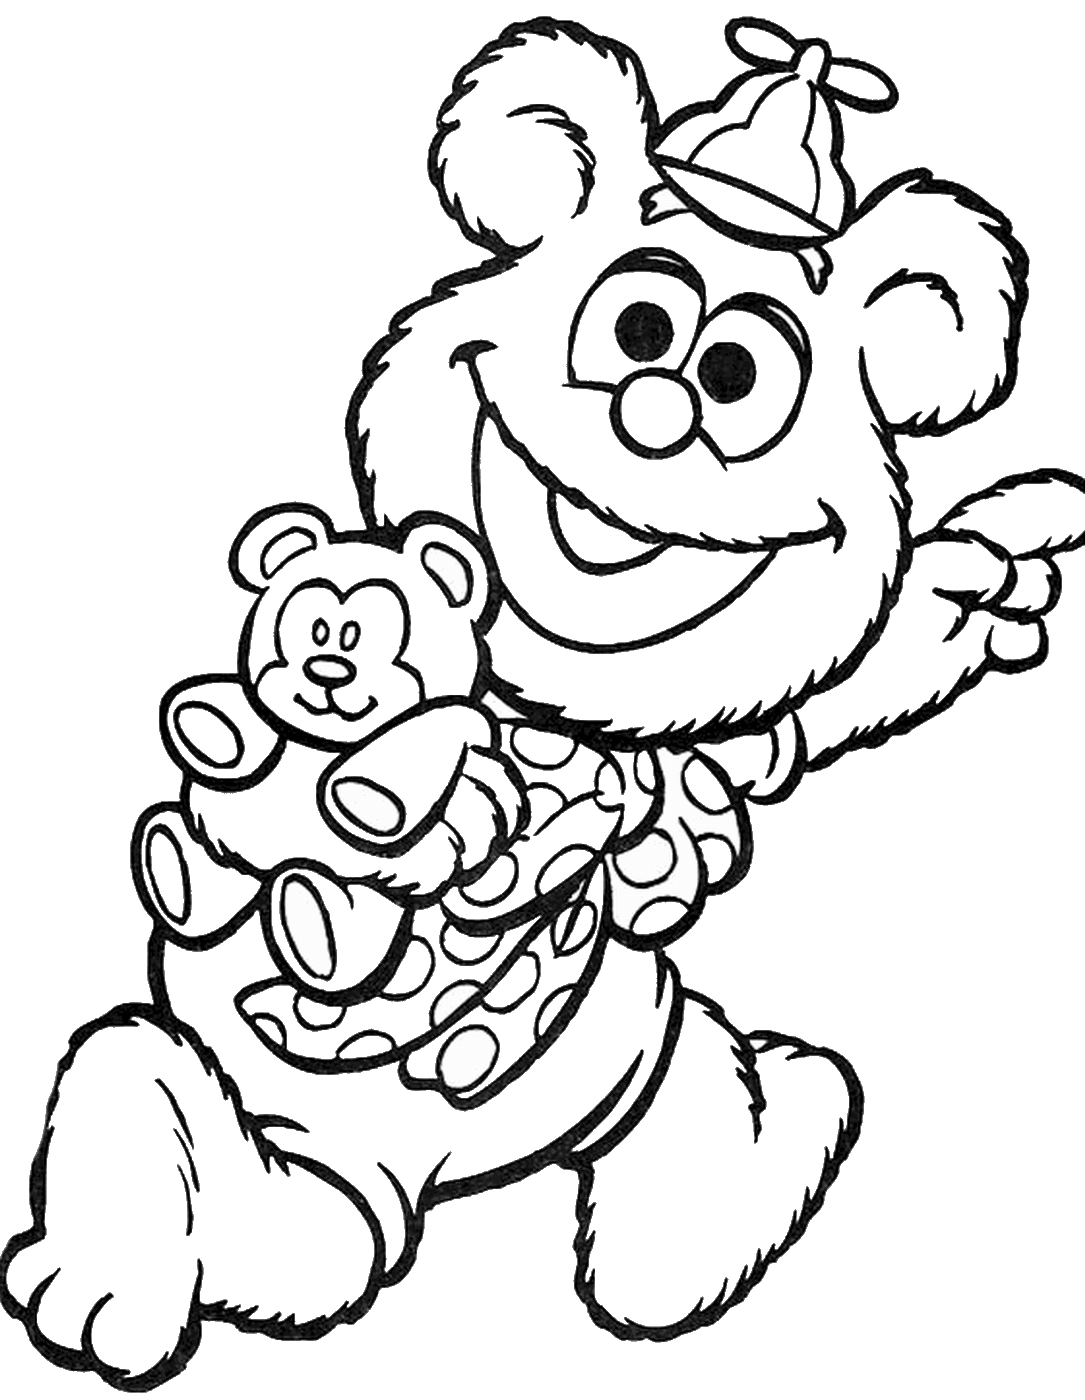 The Muppet Show Coloring Pages TV Film muppets_cl_26 Printable 2020 09385 Coloring4free